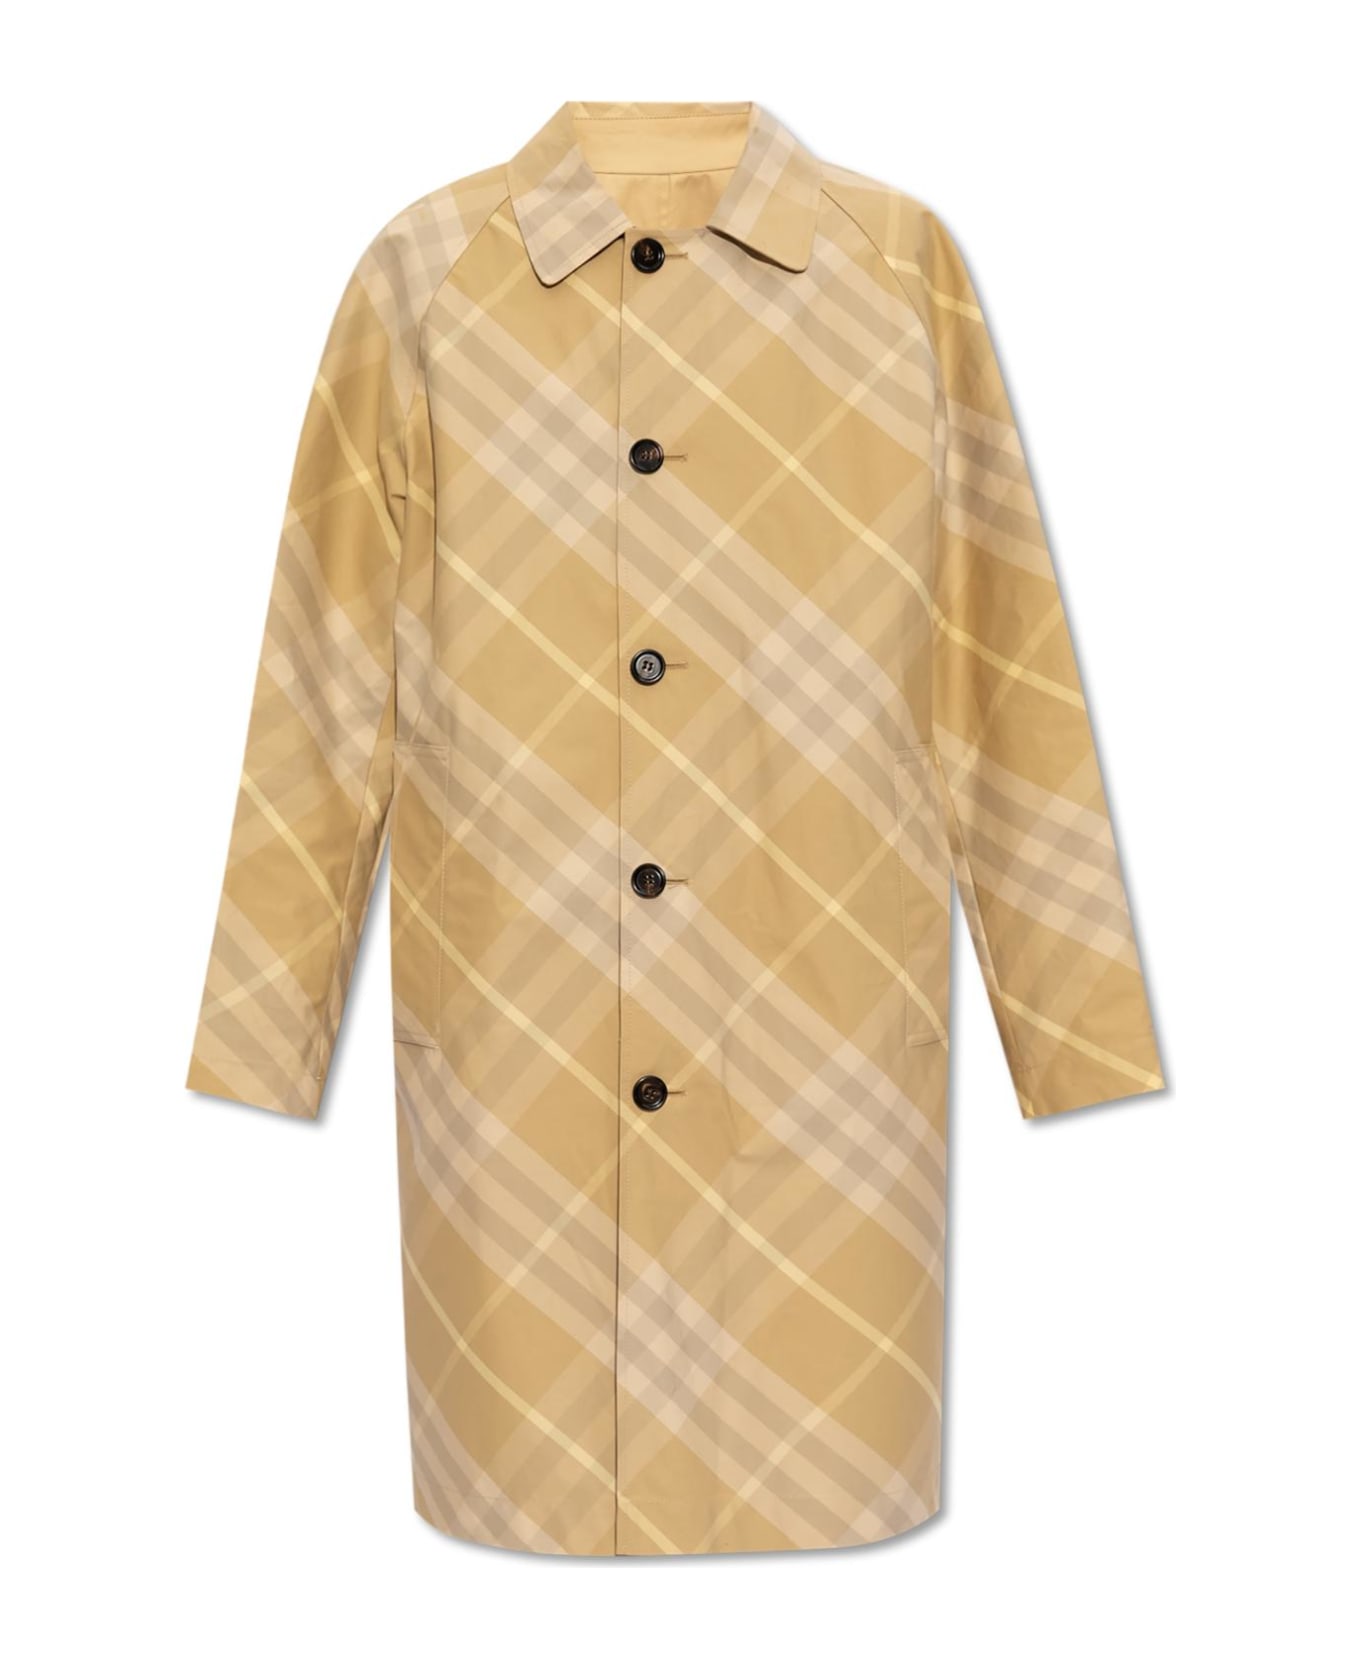 Burberry Reversible Trench Coat - Flax